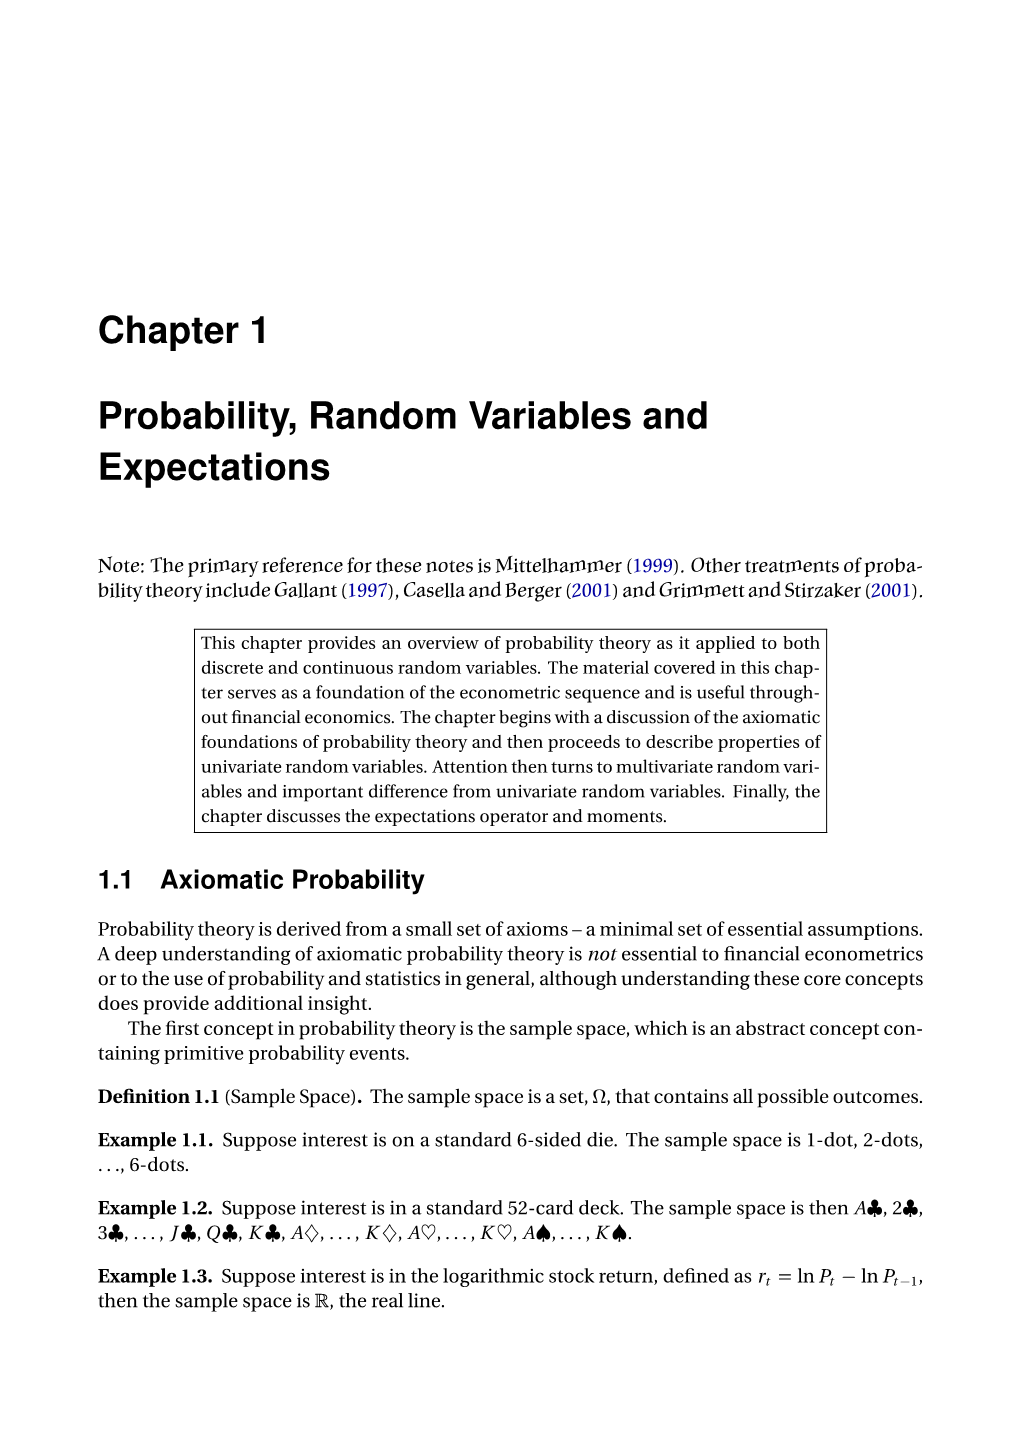 Chapter 1 Probability, Random Variables and Expectations